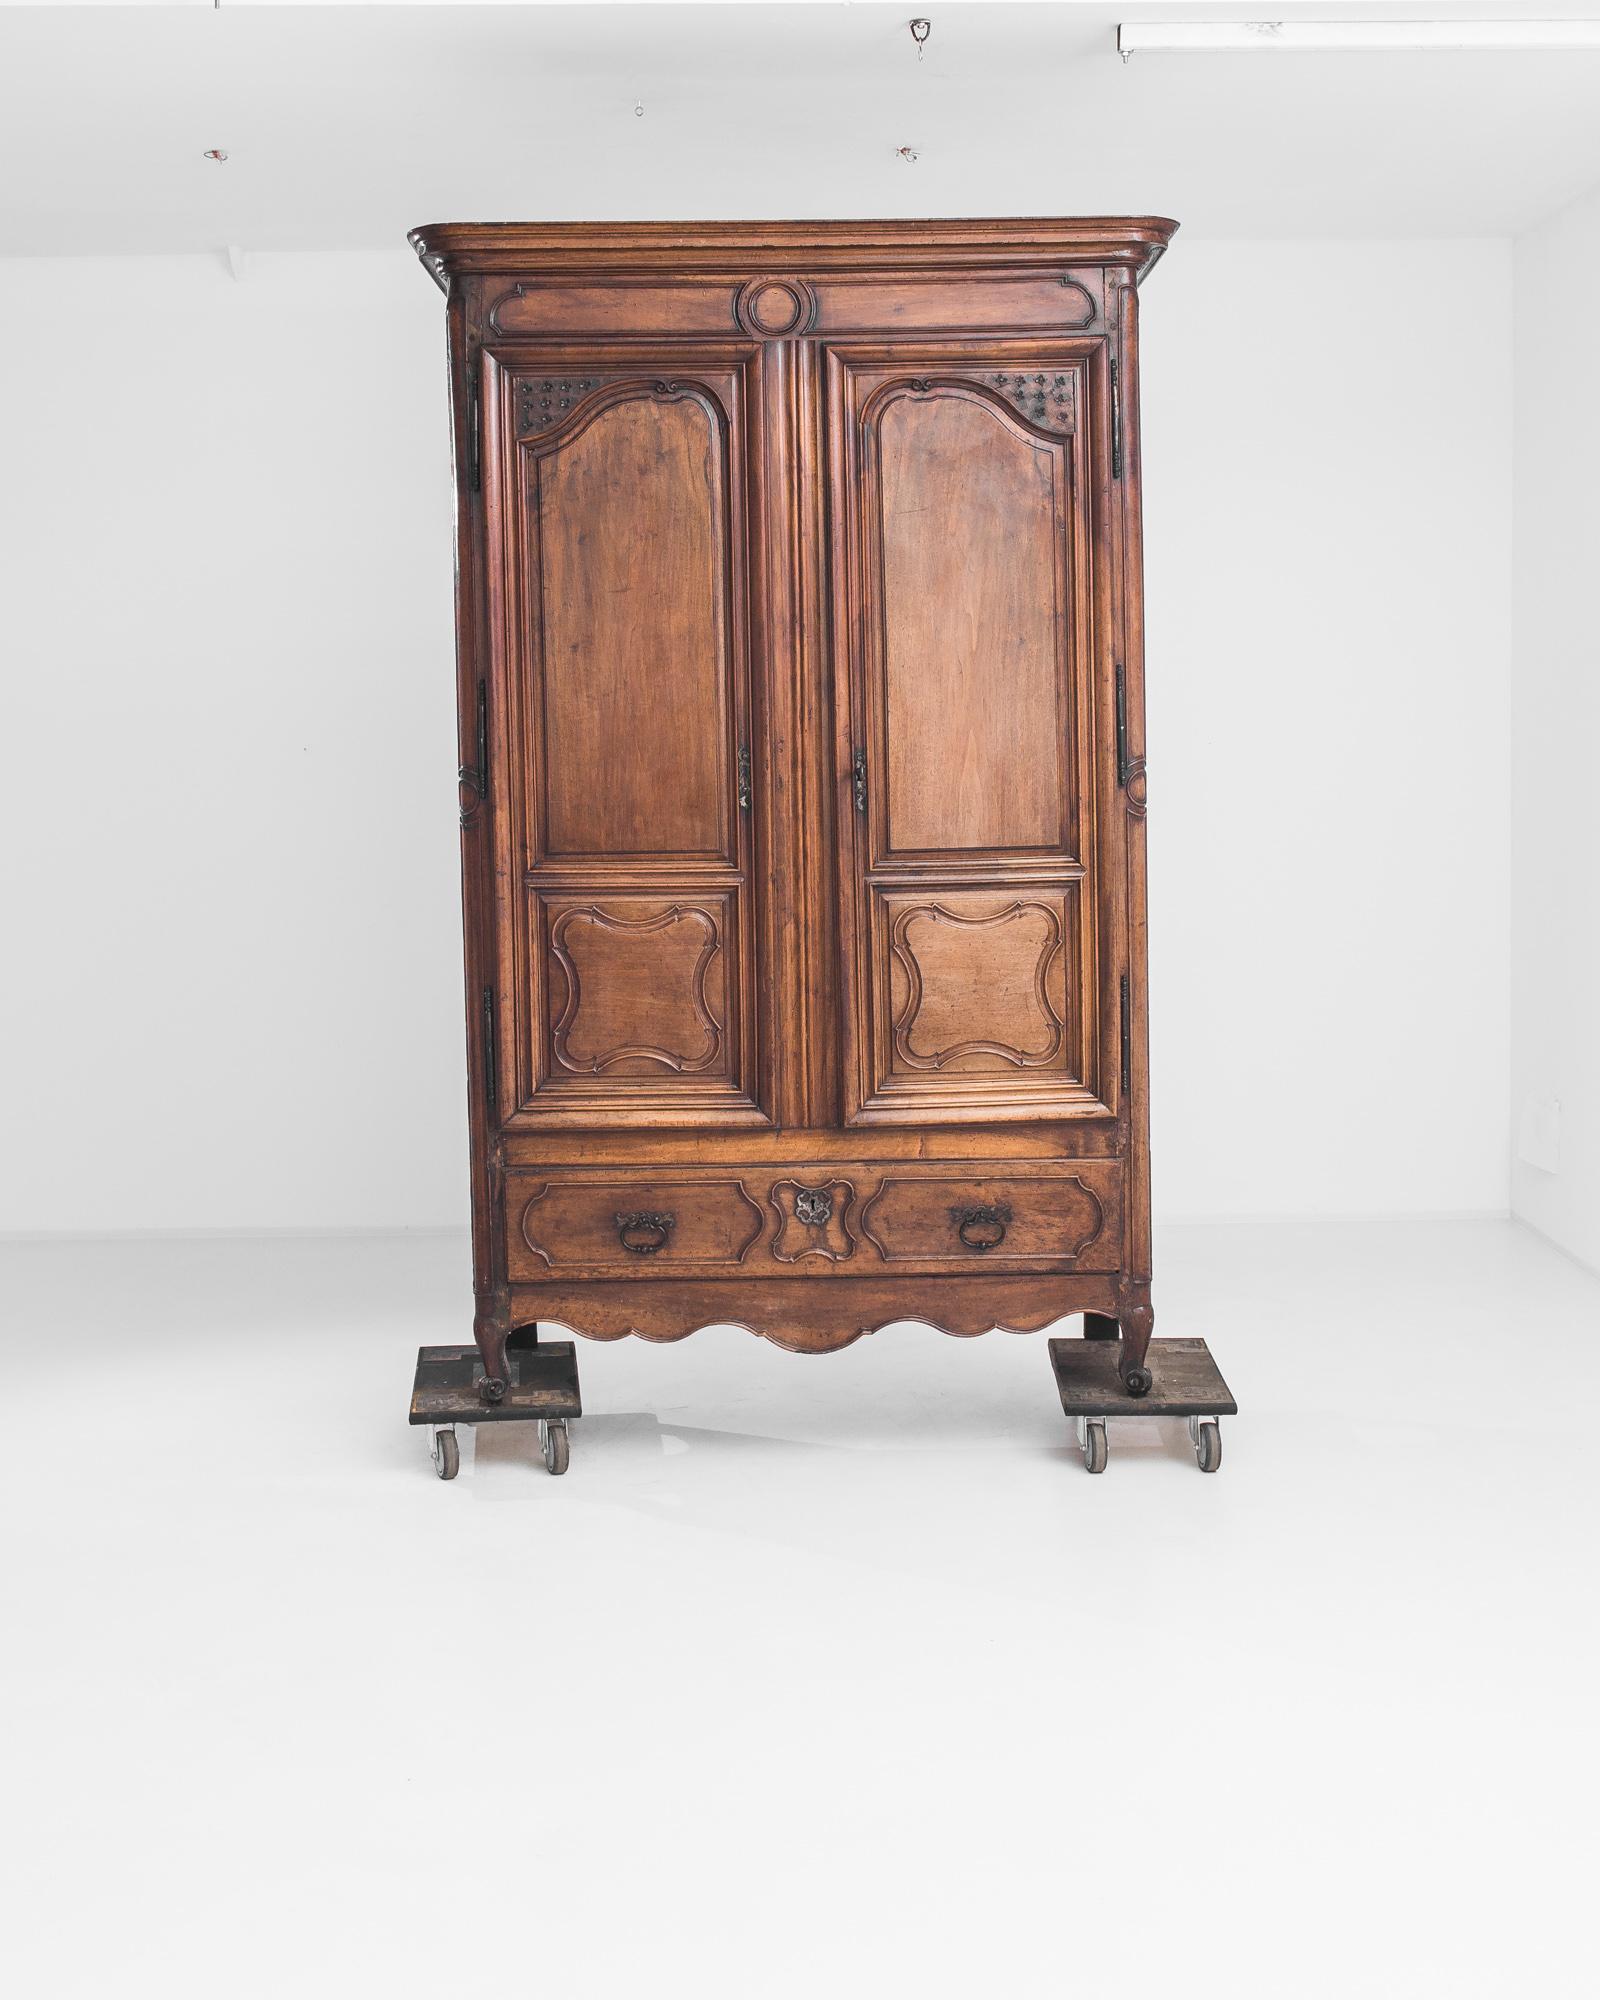 Elegant lines and a wealth of charming details gives this antique cabinet a perennial freshness. Made in France in the 1780s, the wood has retained its original finish — a rich auburn, with honeyed undertones and a silken polish. The fluid curves of